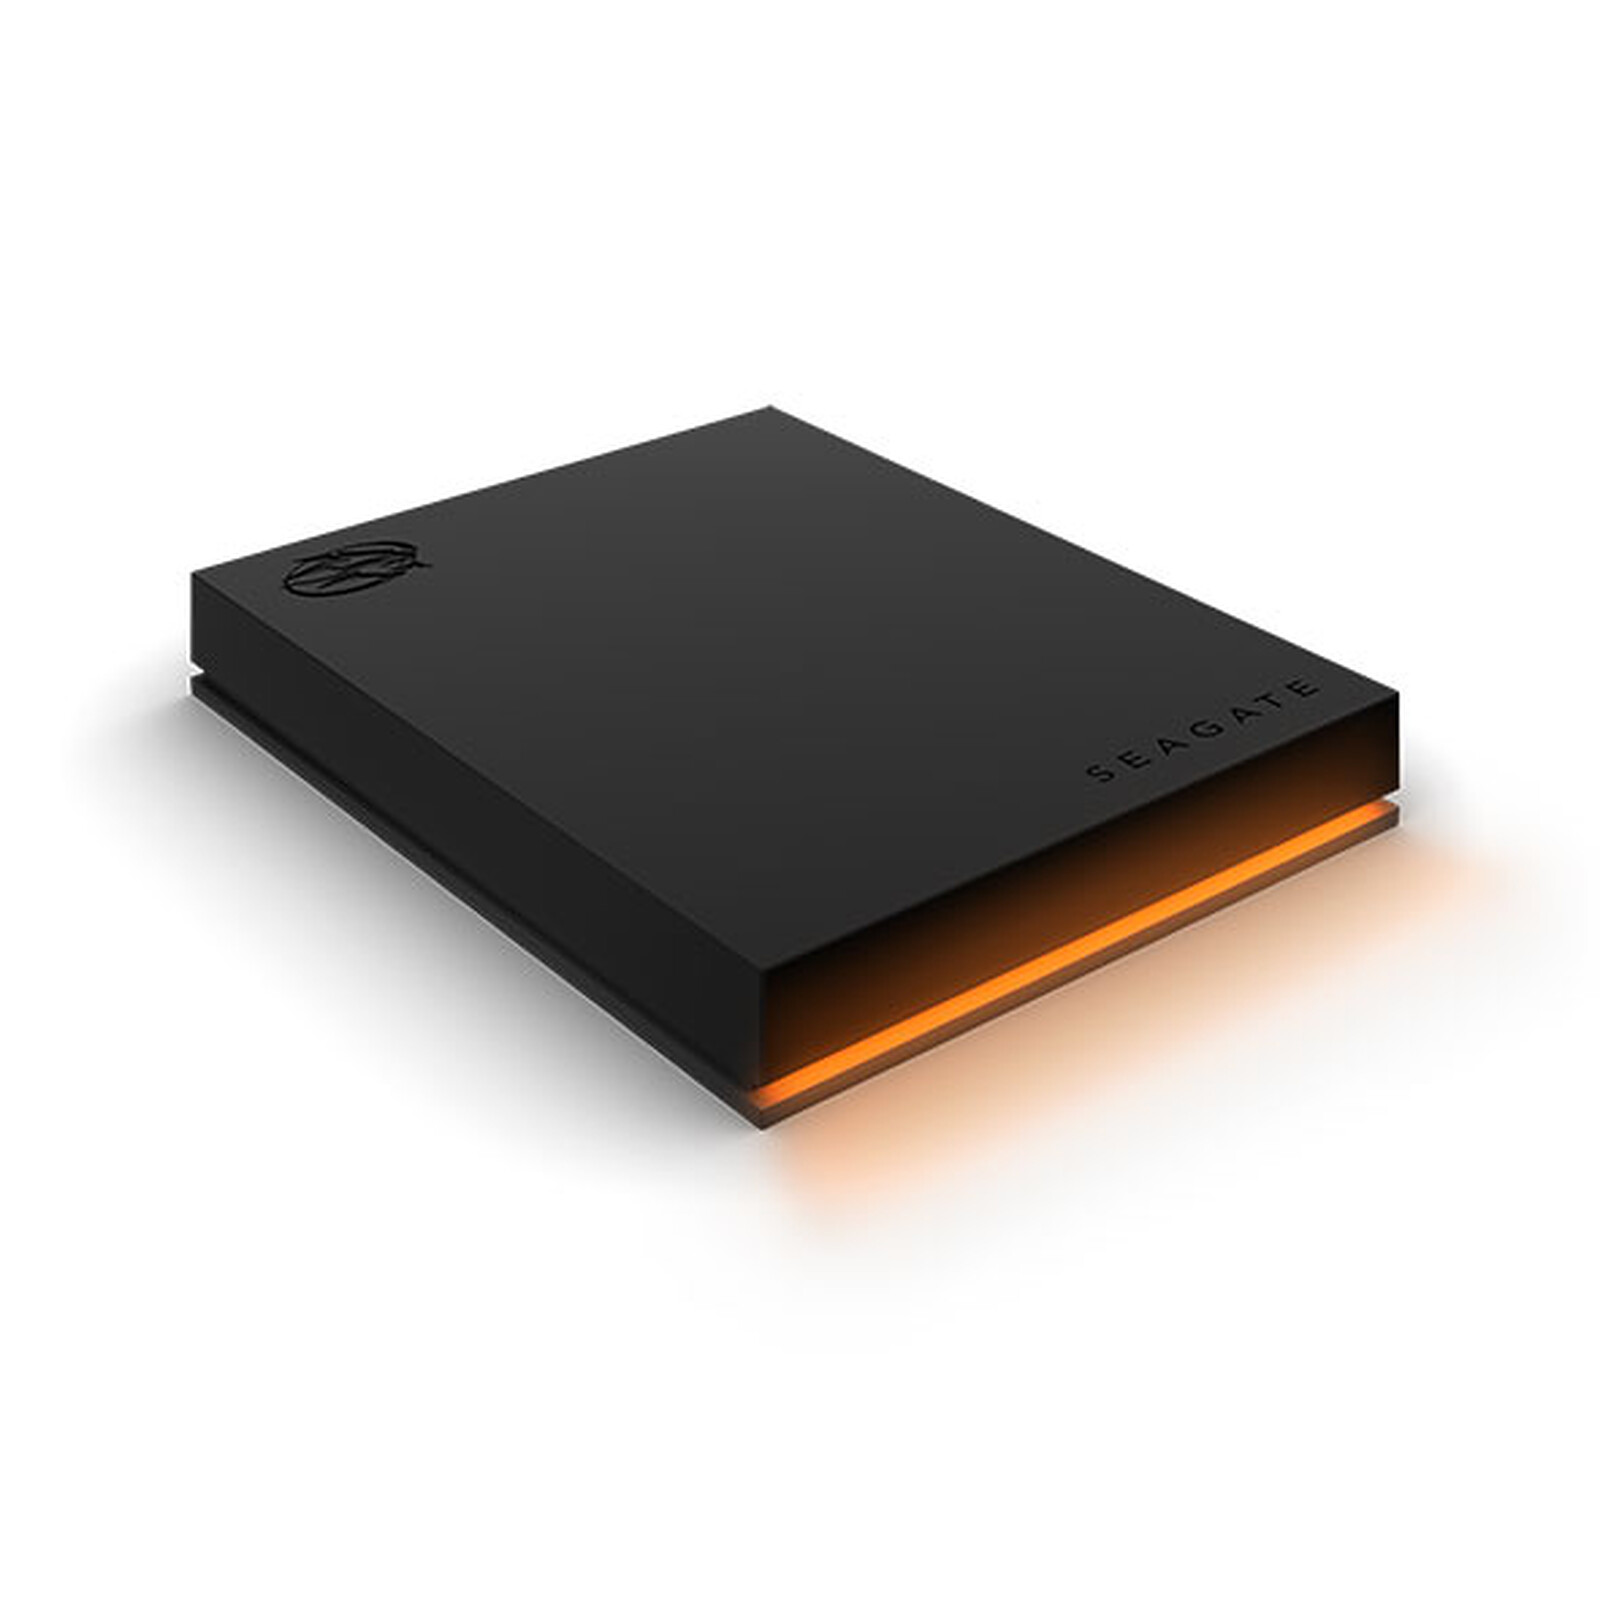 WD_BLACK P10 Game Drive - Disque dur externe Gaming - 8To - PS4